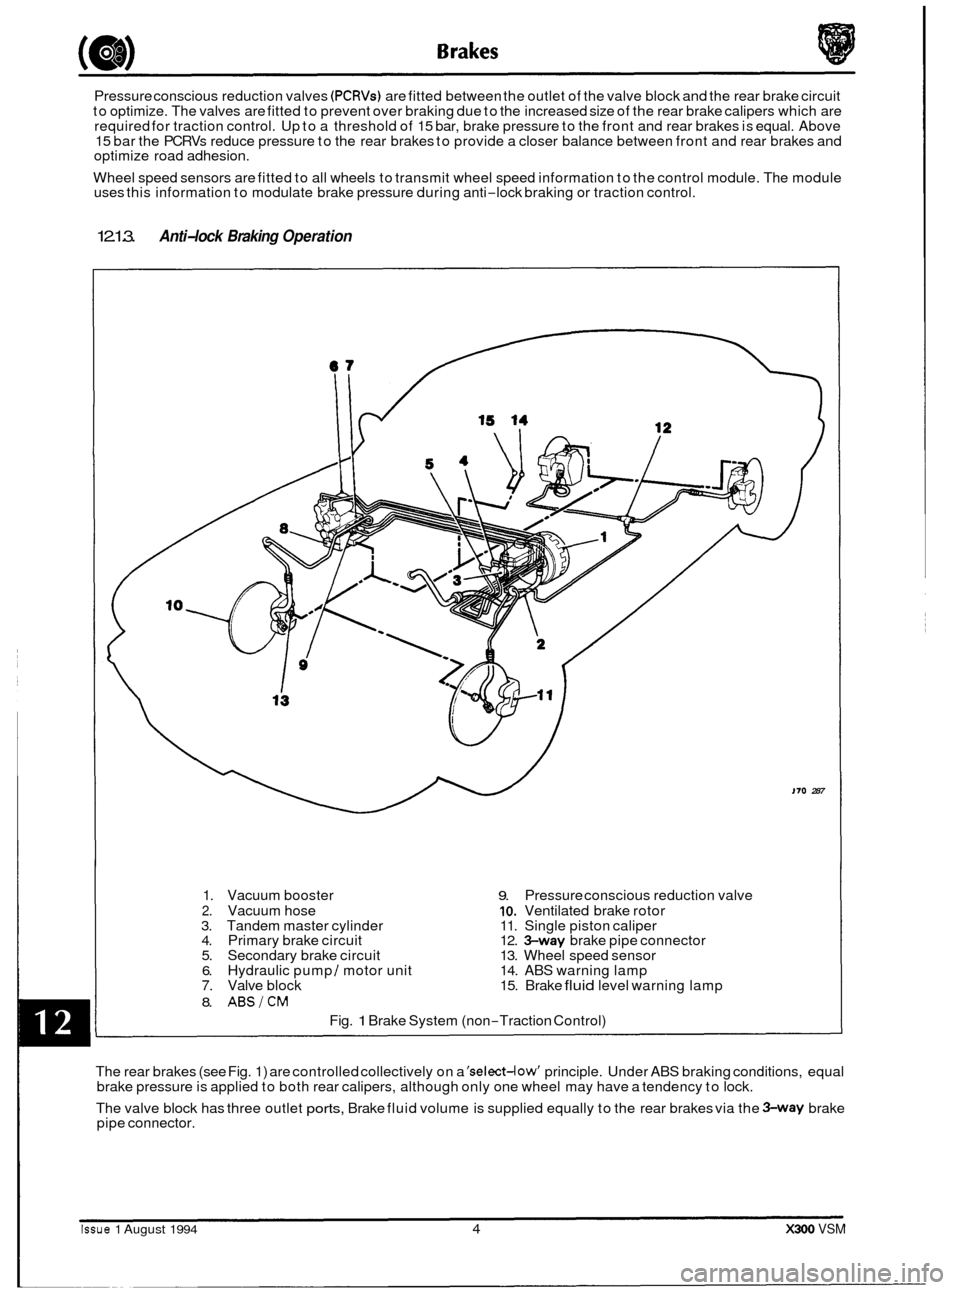 JAGUAR XJ6 1994 2.G Workshop Manual Pressure conscious reduction valves (PCRVs) are fitted  between  the outlet  of the  valve block and  the rear brake  circuit 
to  optimize. The valves are  fitted to prevent  over braking  due to the